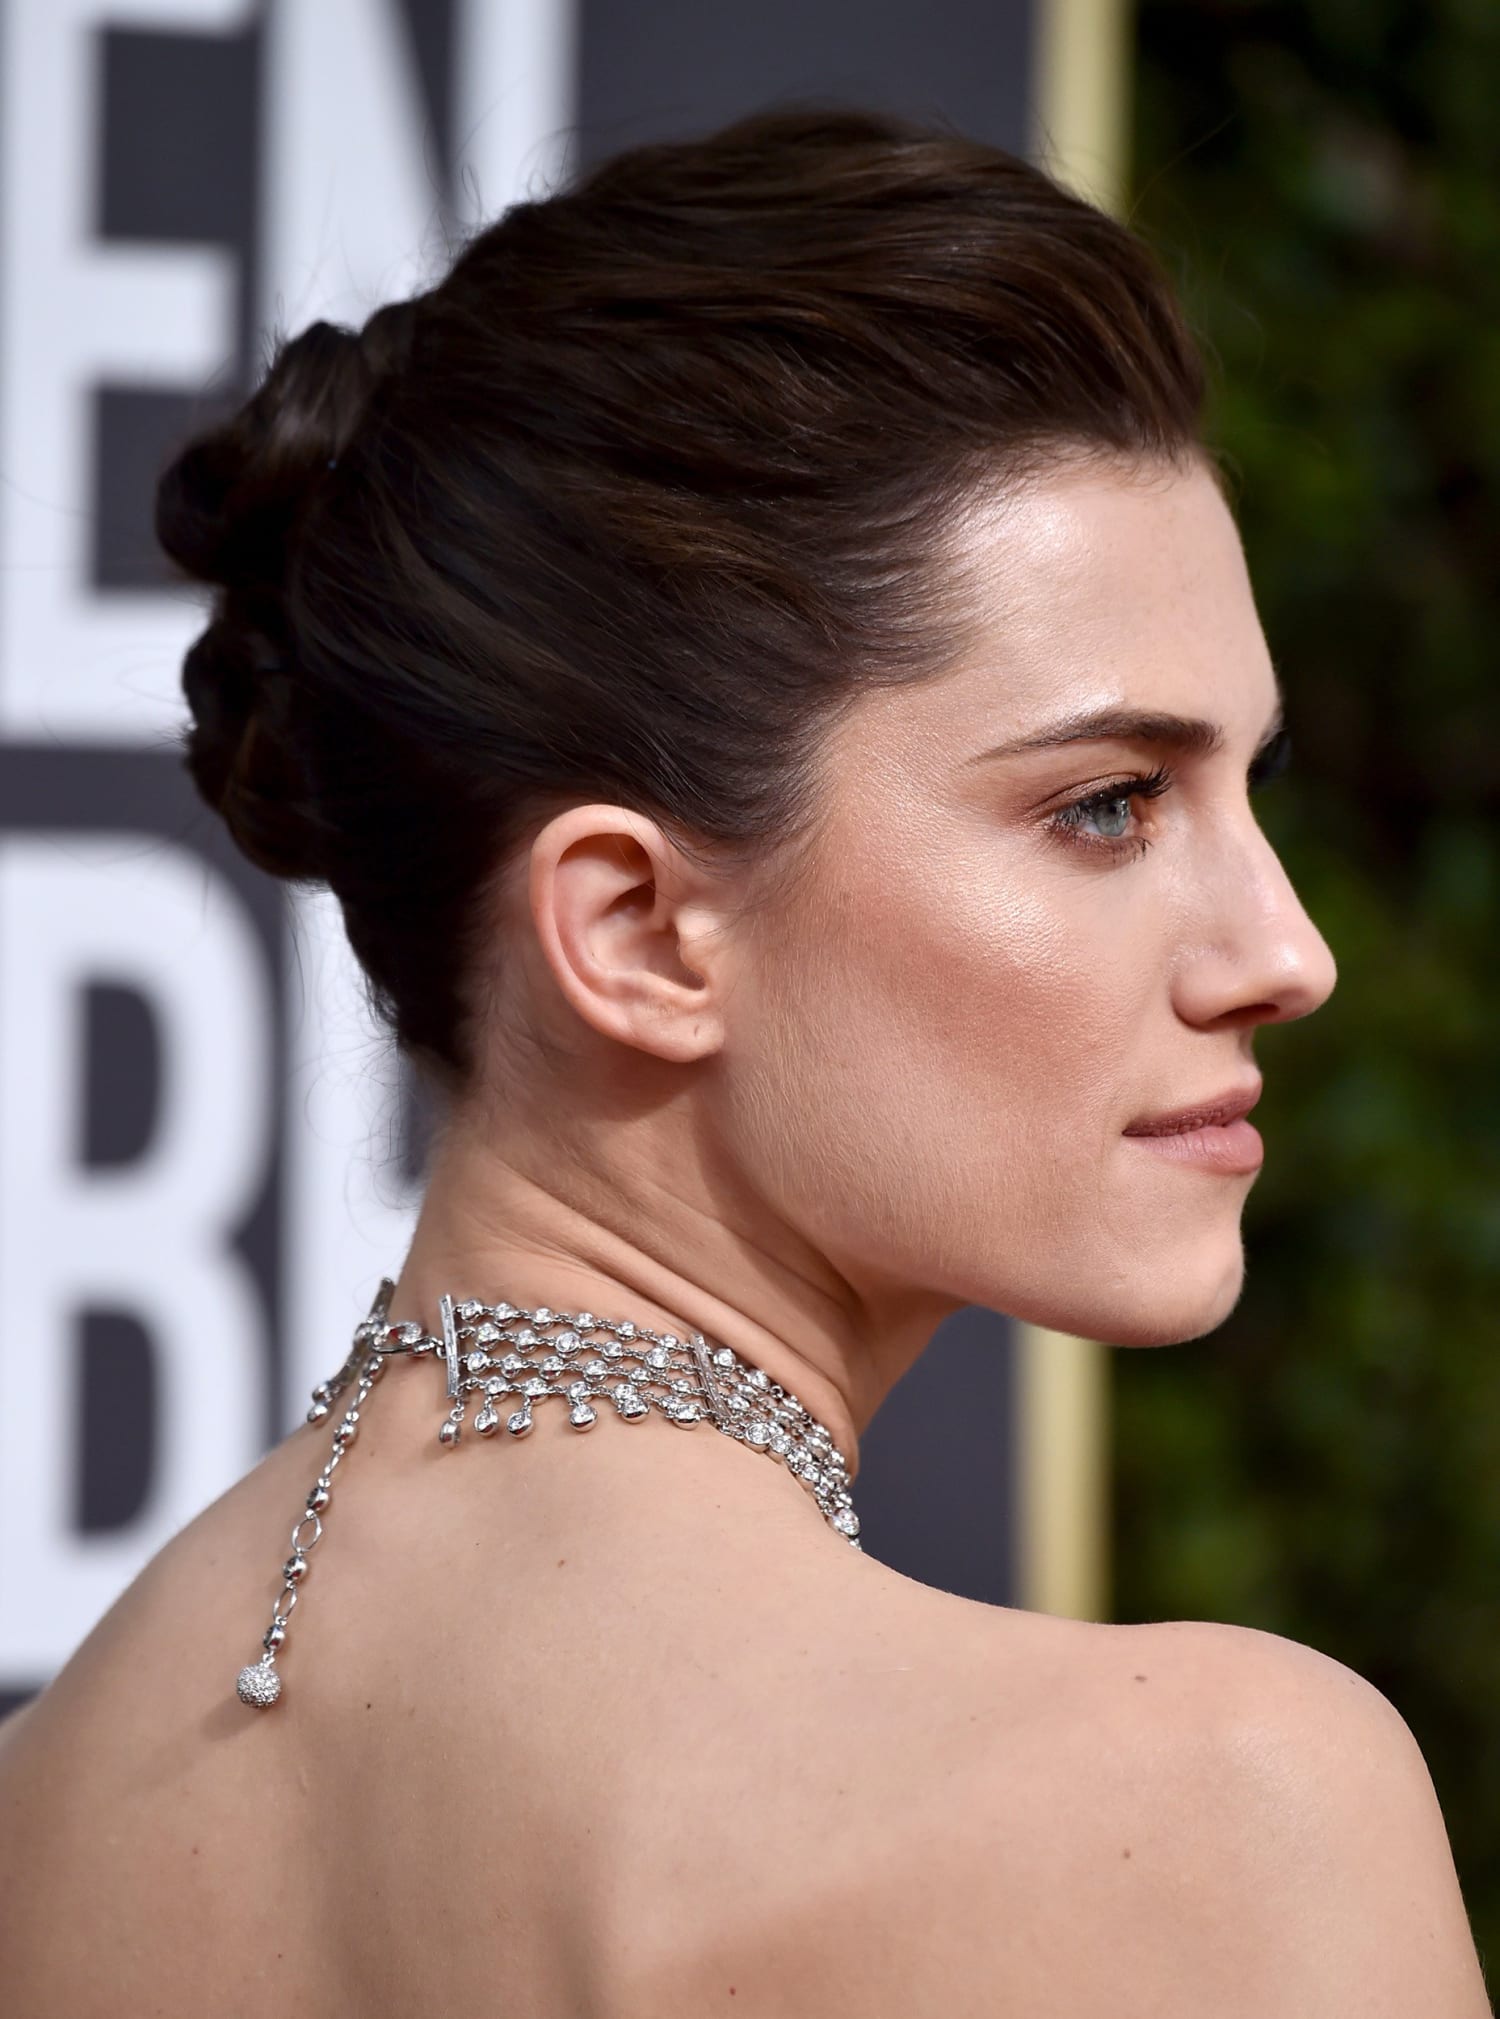 Golden Globes 2018: The best hairstyles on the red carpet